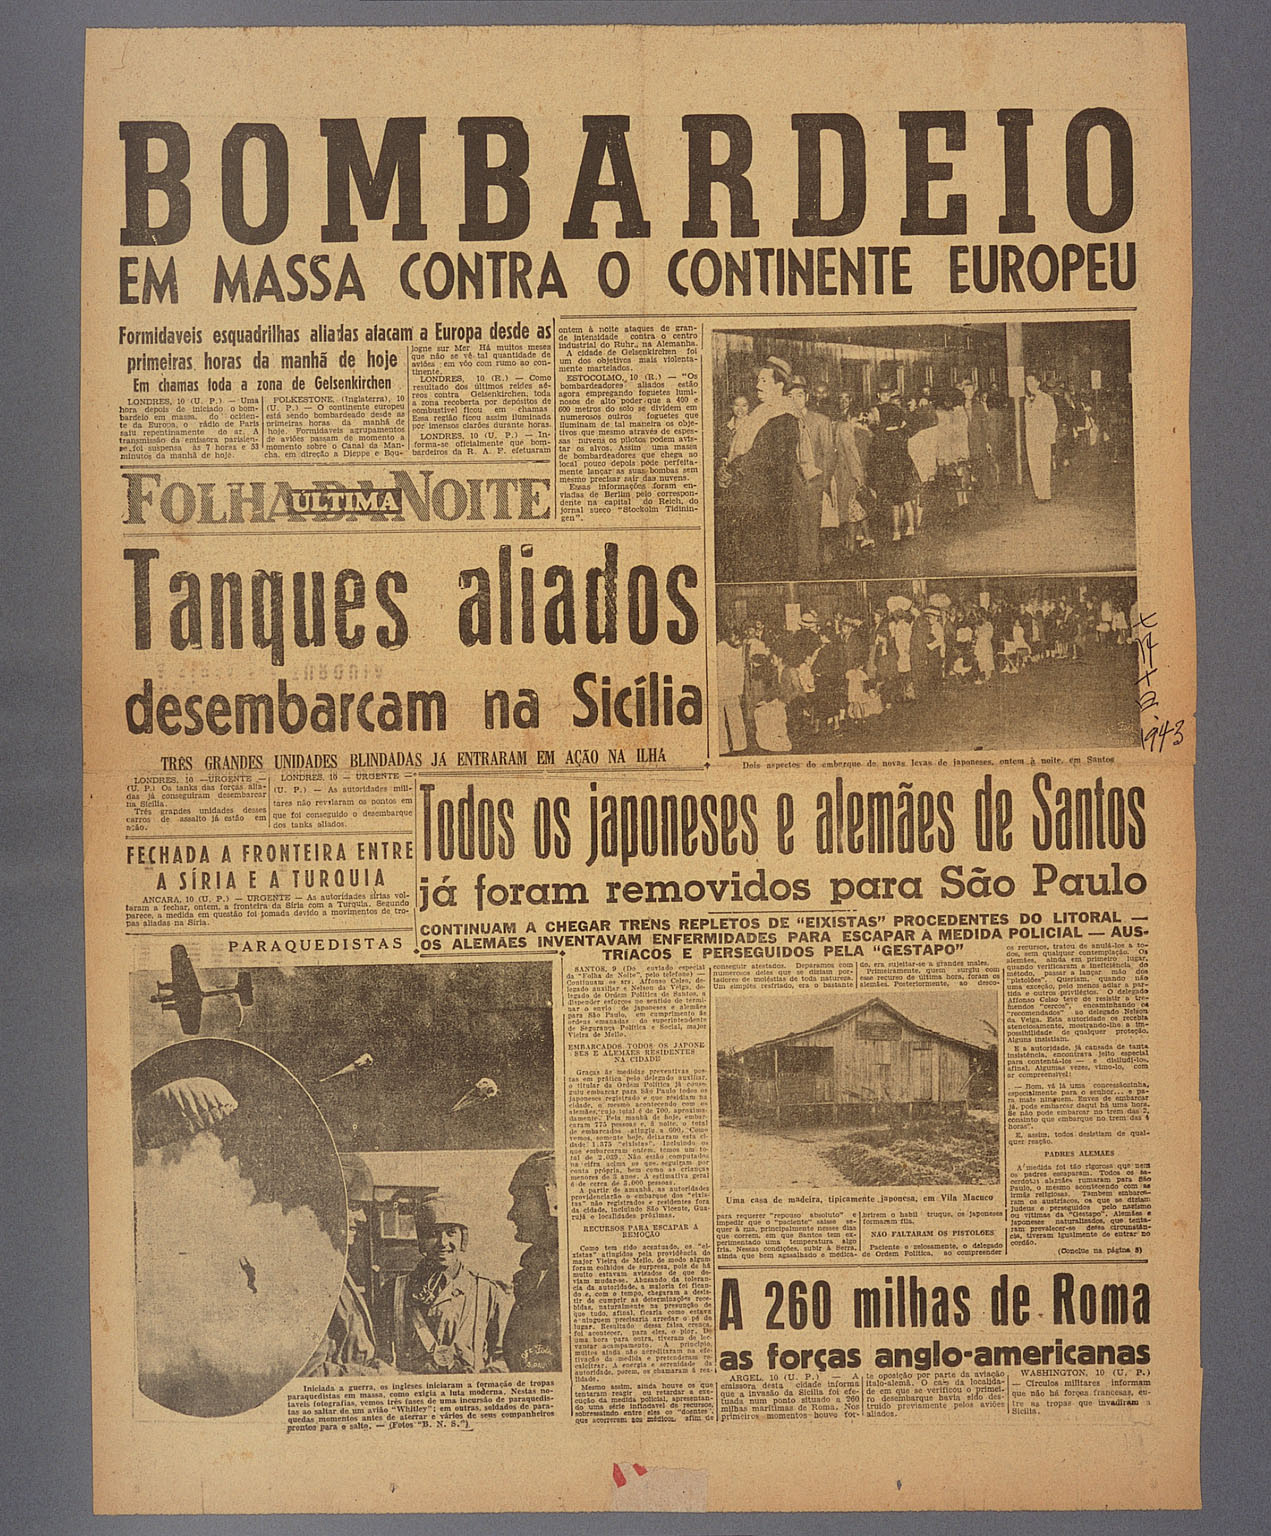 Image “Portuguese language newspaper article reporting the forced evacuation of Axis nationals from Santos”